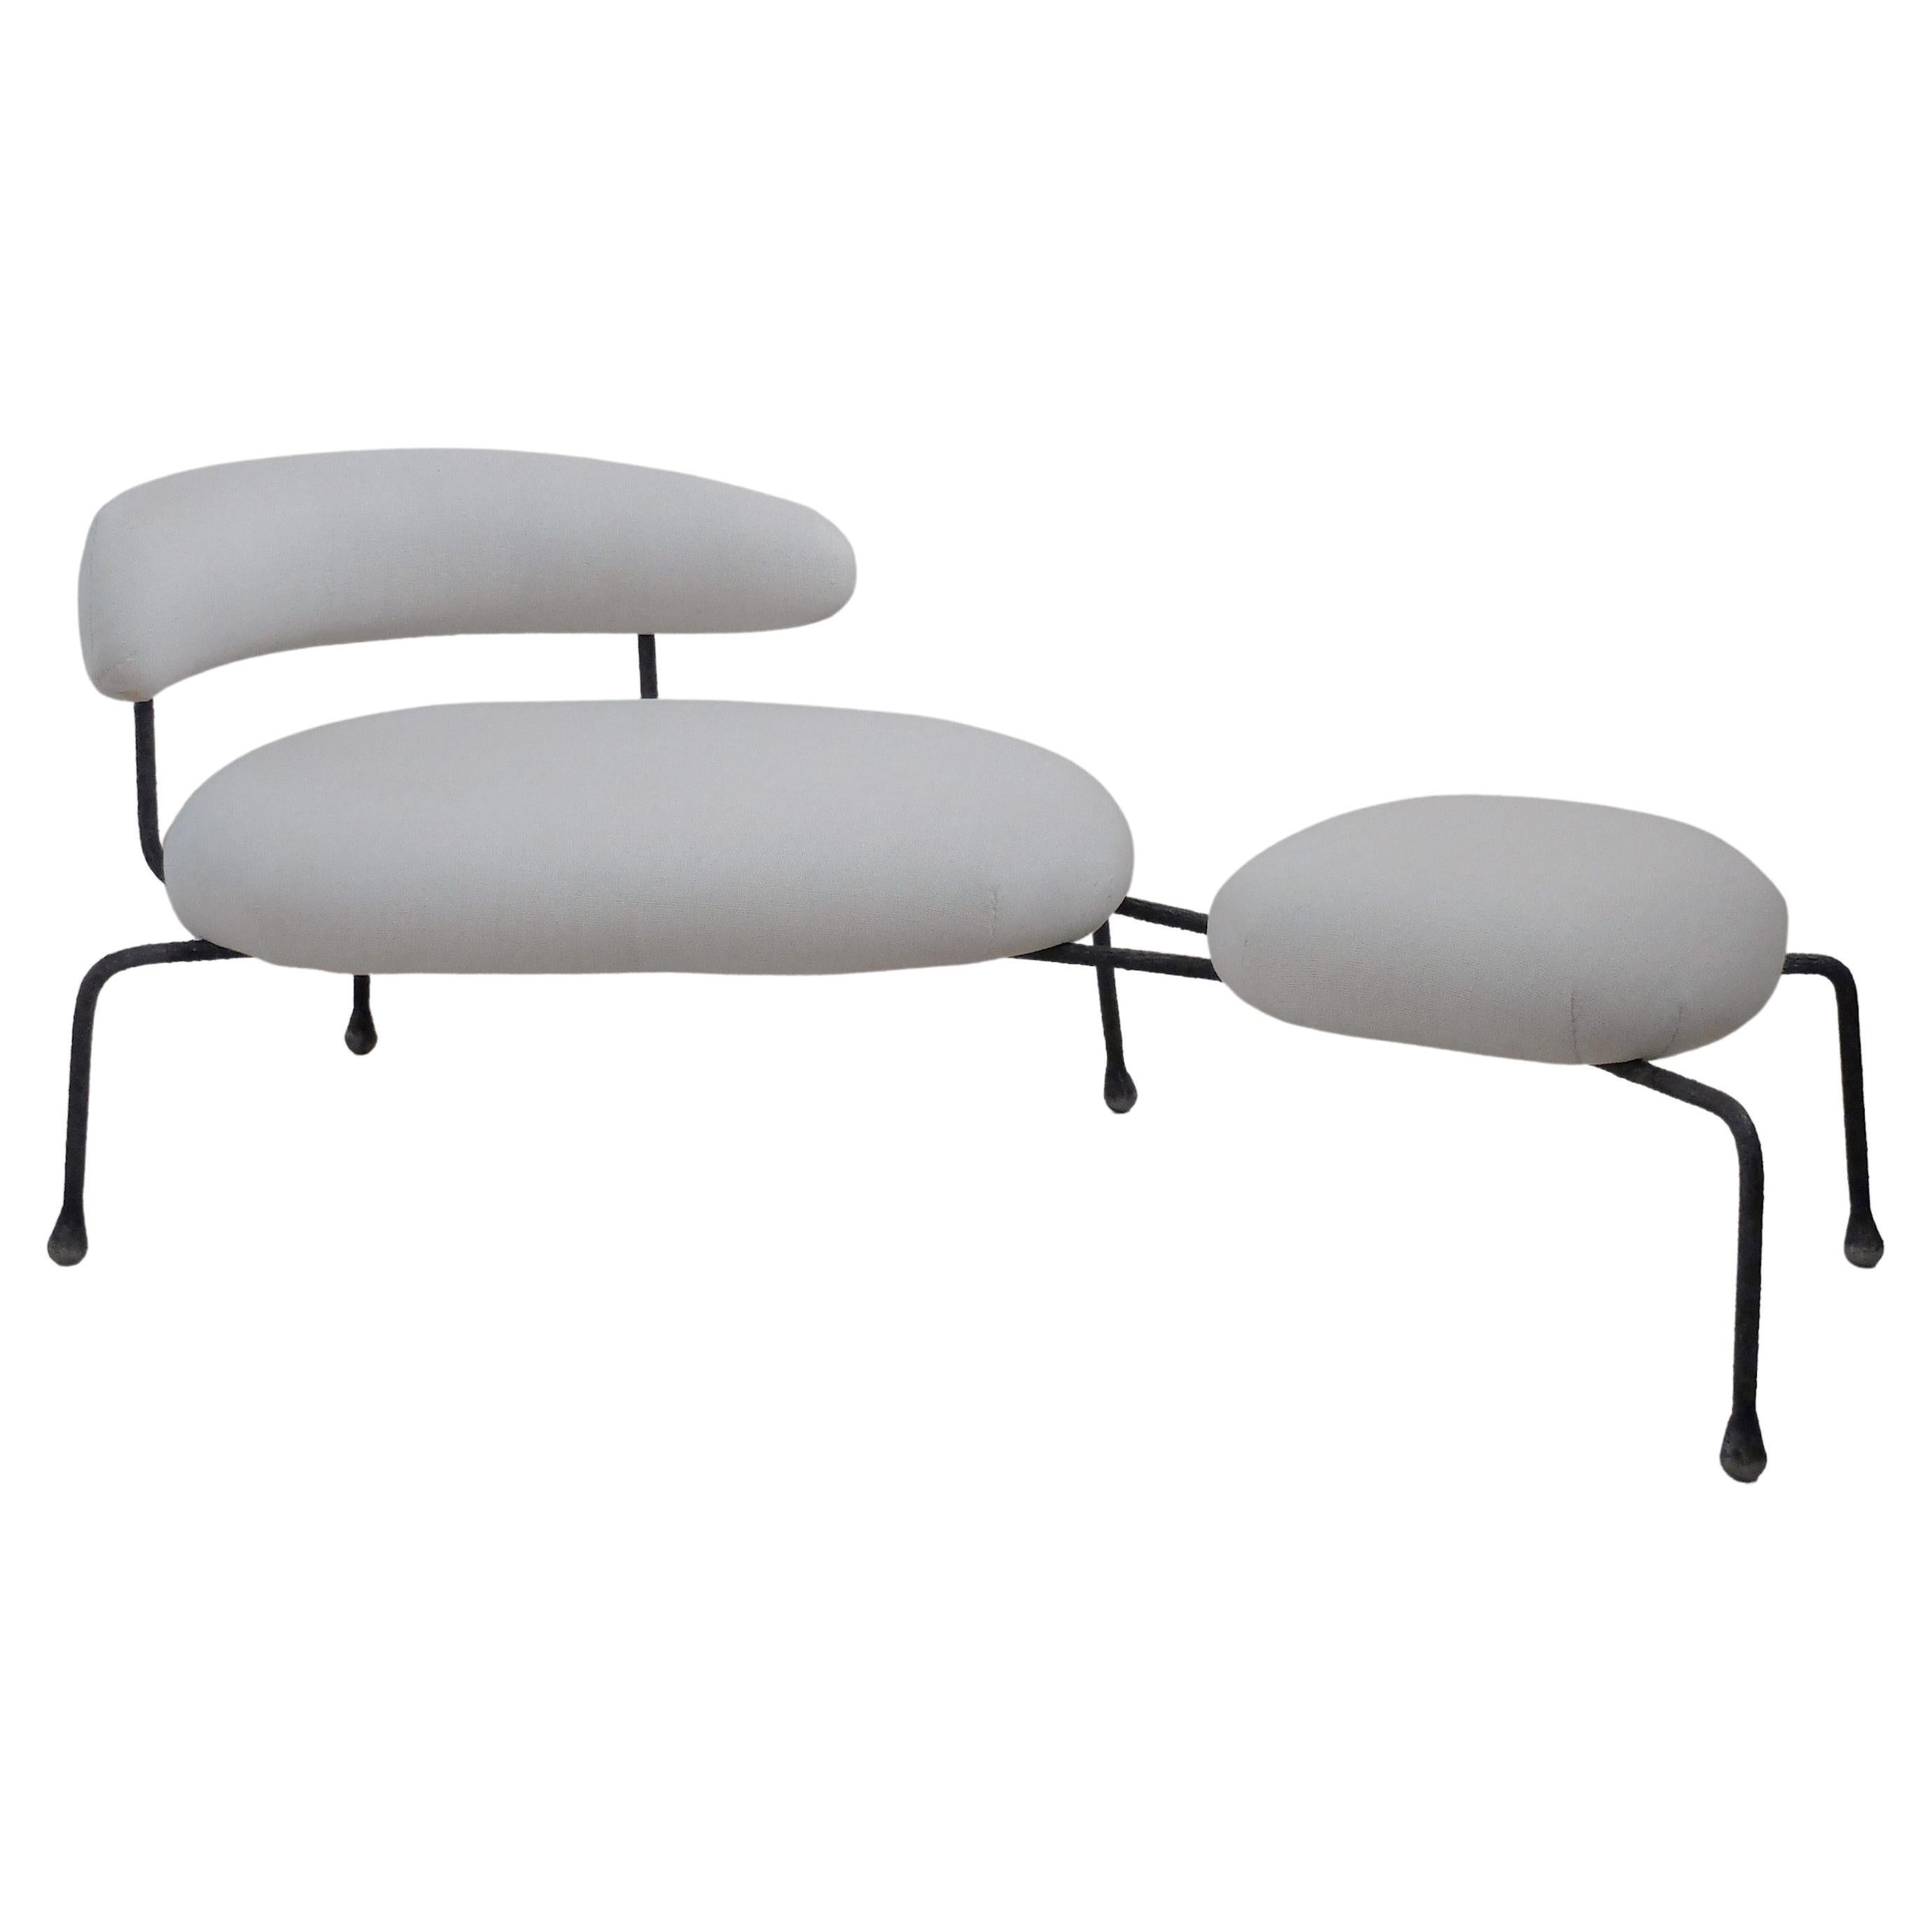 Reveur I Anthracite Seating by Altin For Sale